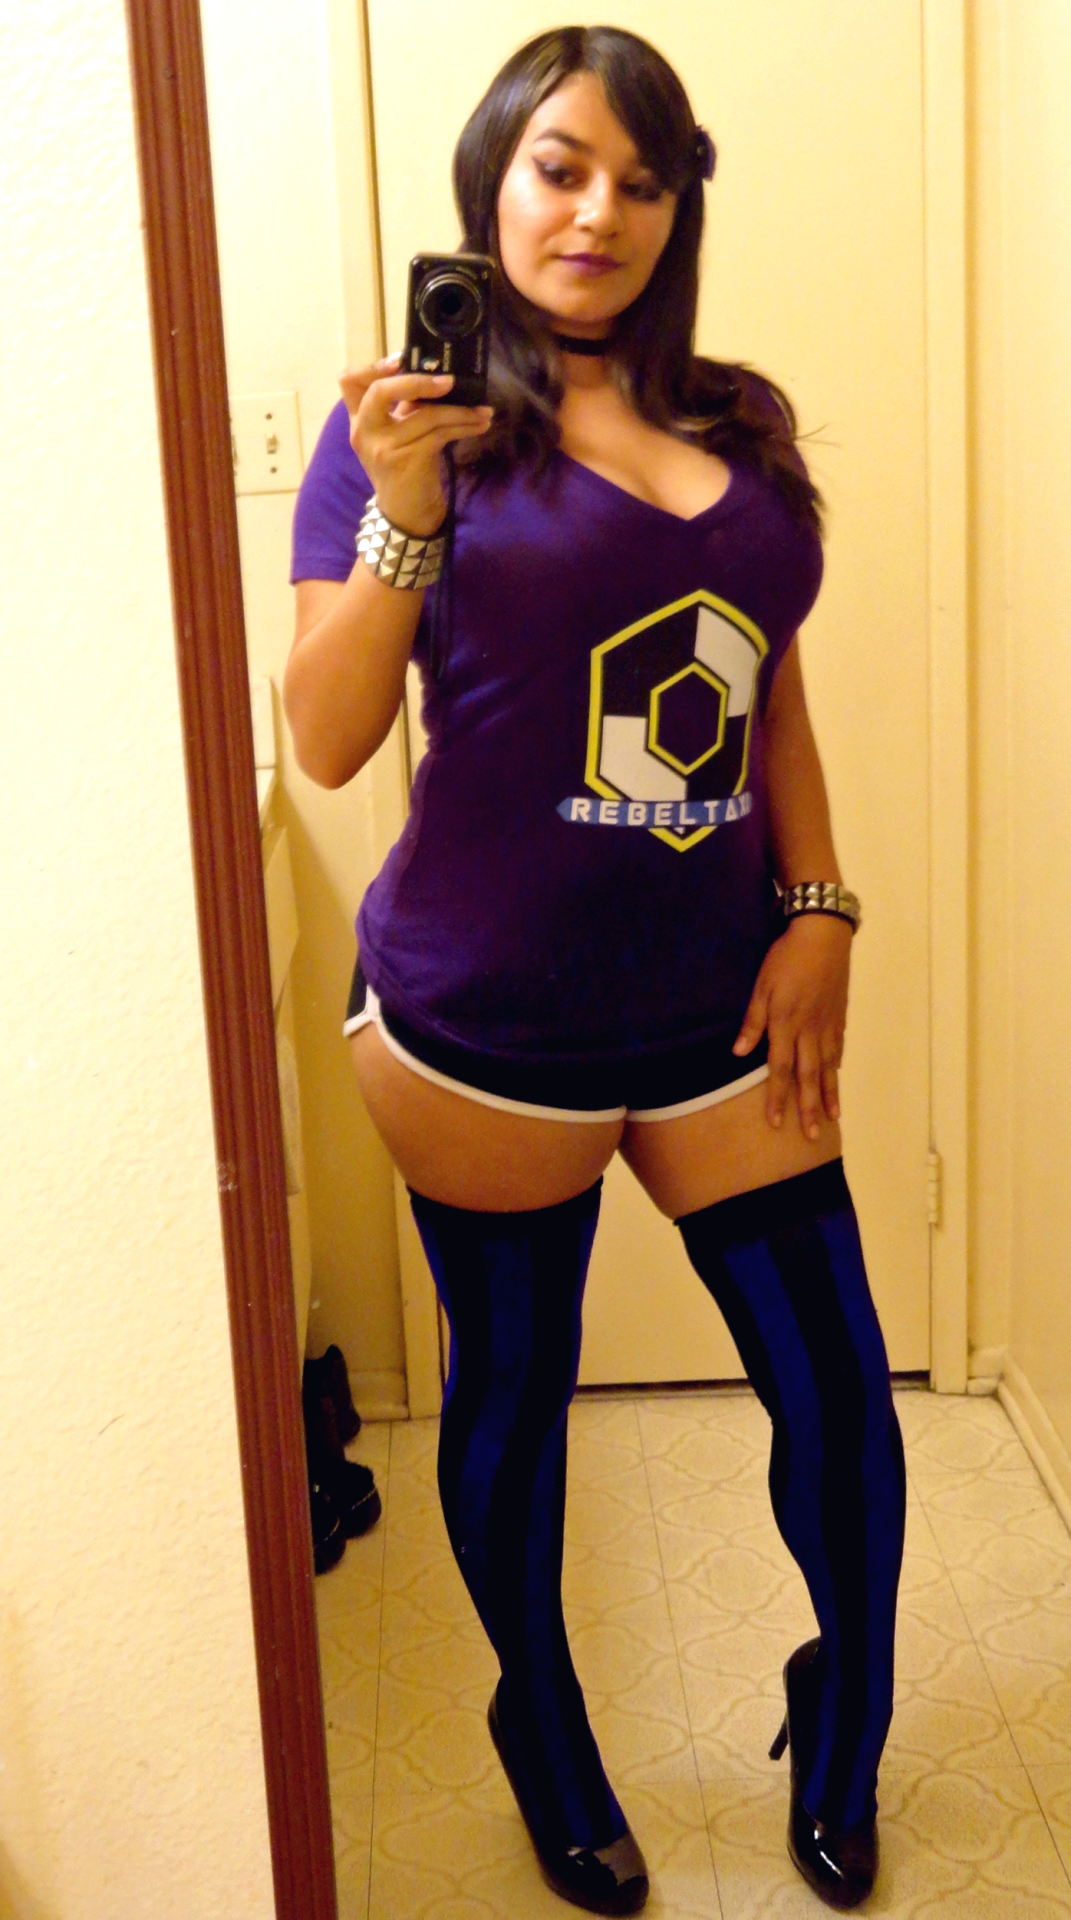 zoestanleyarts:  My Rebeltaxi shirt arrived today!  @pan-pizza sells them at his